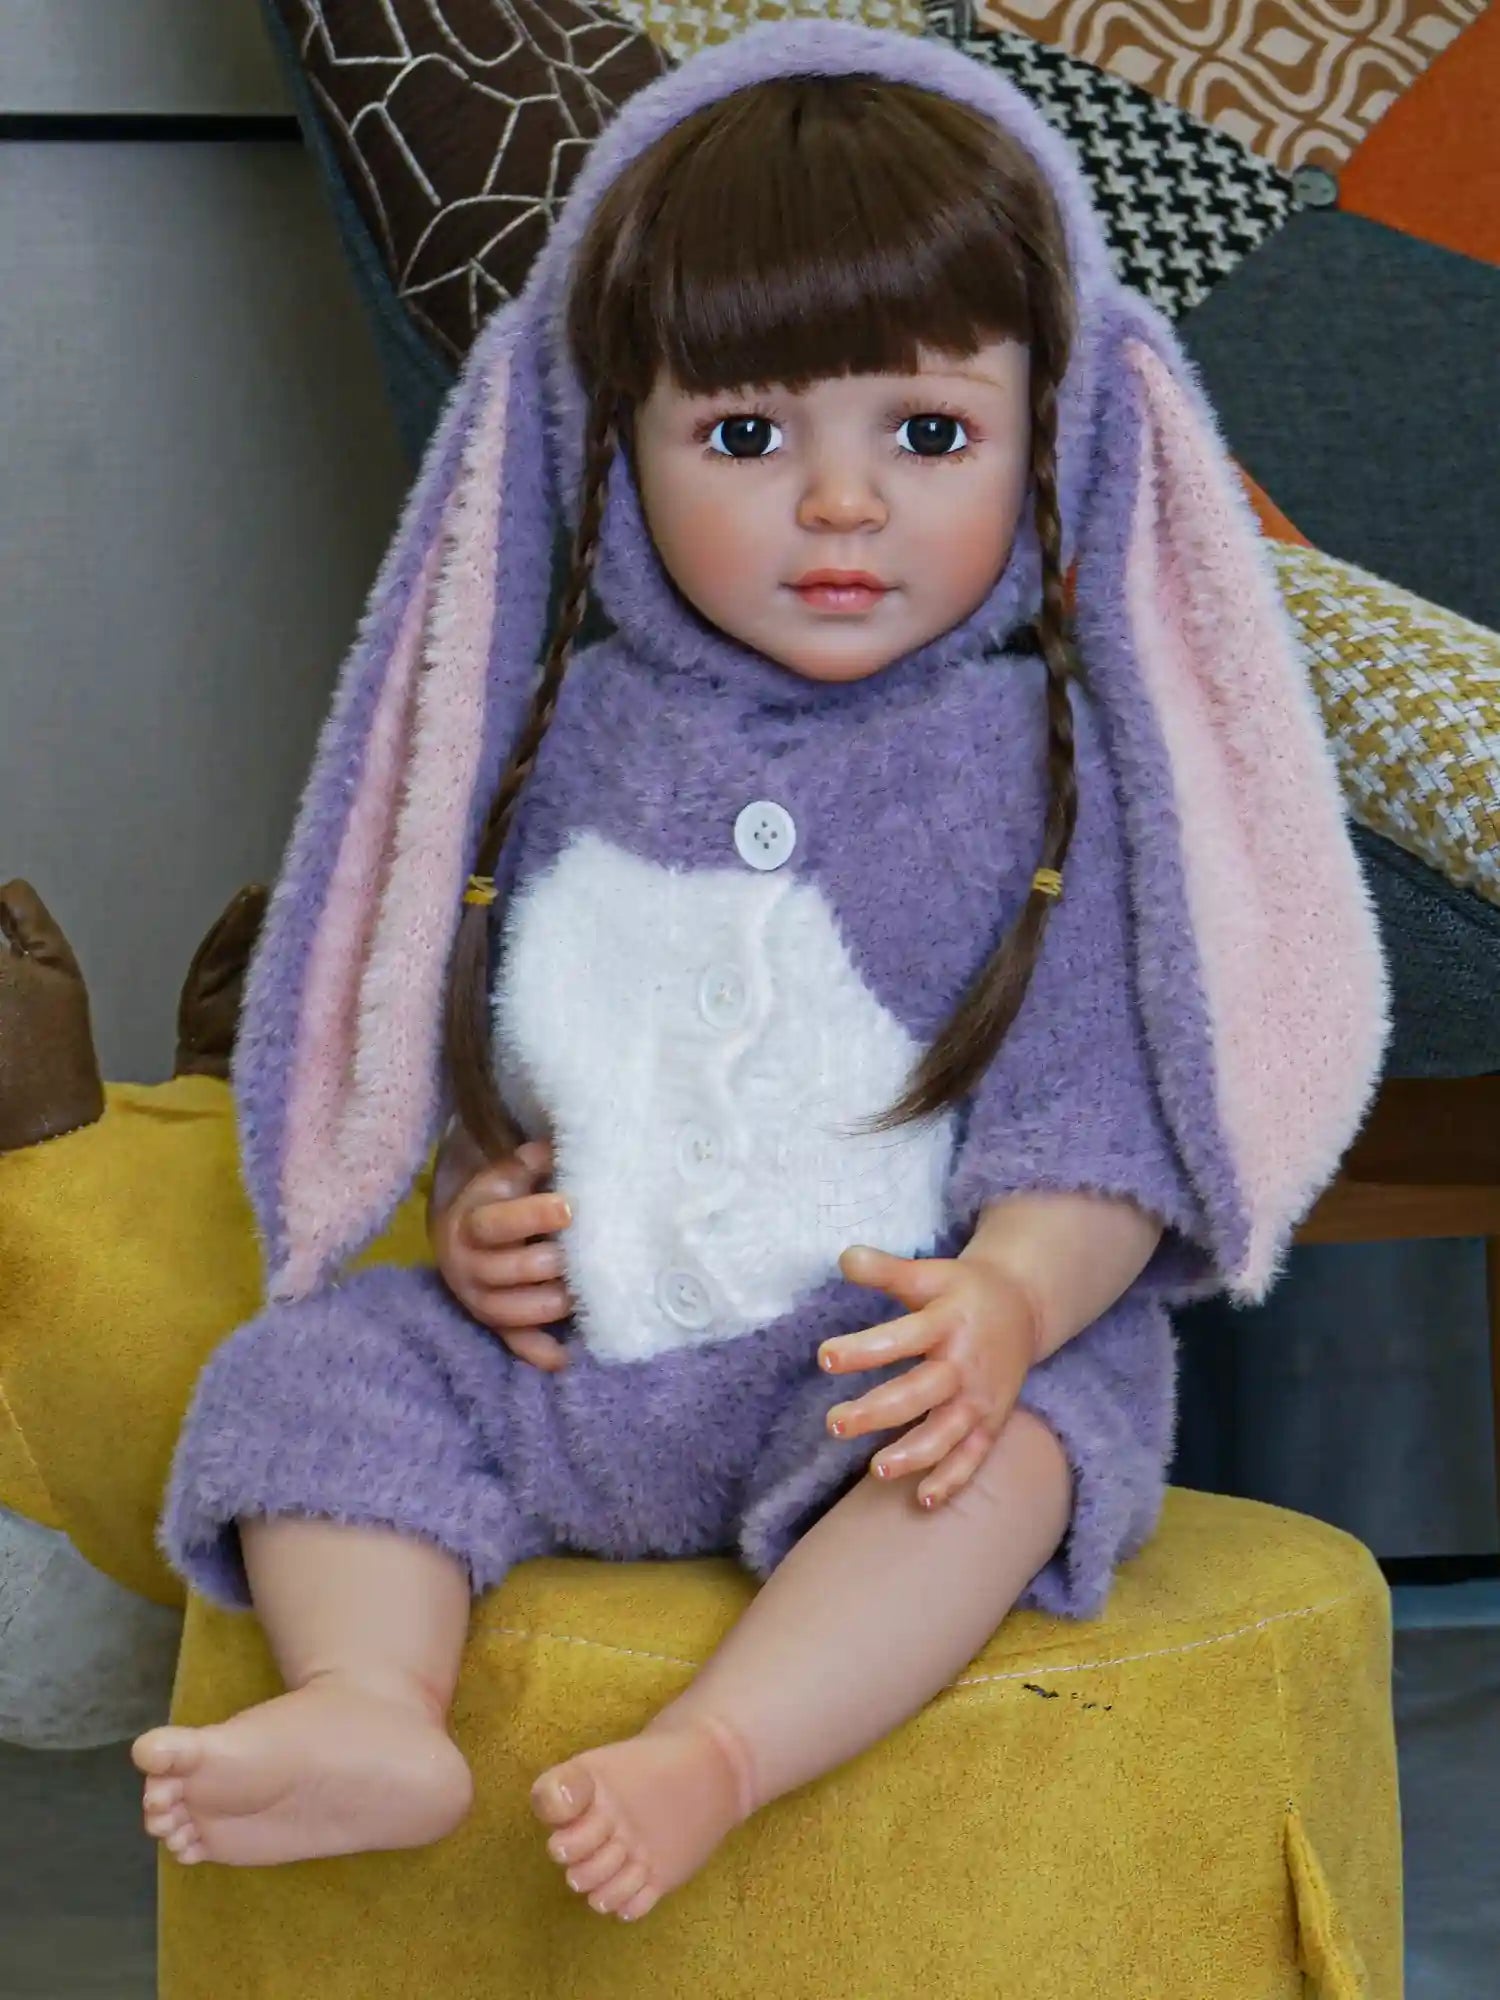 Detailed doll with a gentle expression, featuring dark brown braids, sitting comfortably in a playful bunny costume with pastel purple and pink tones.